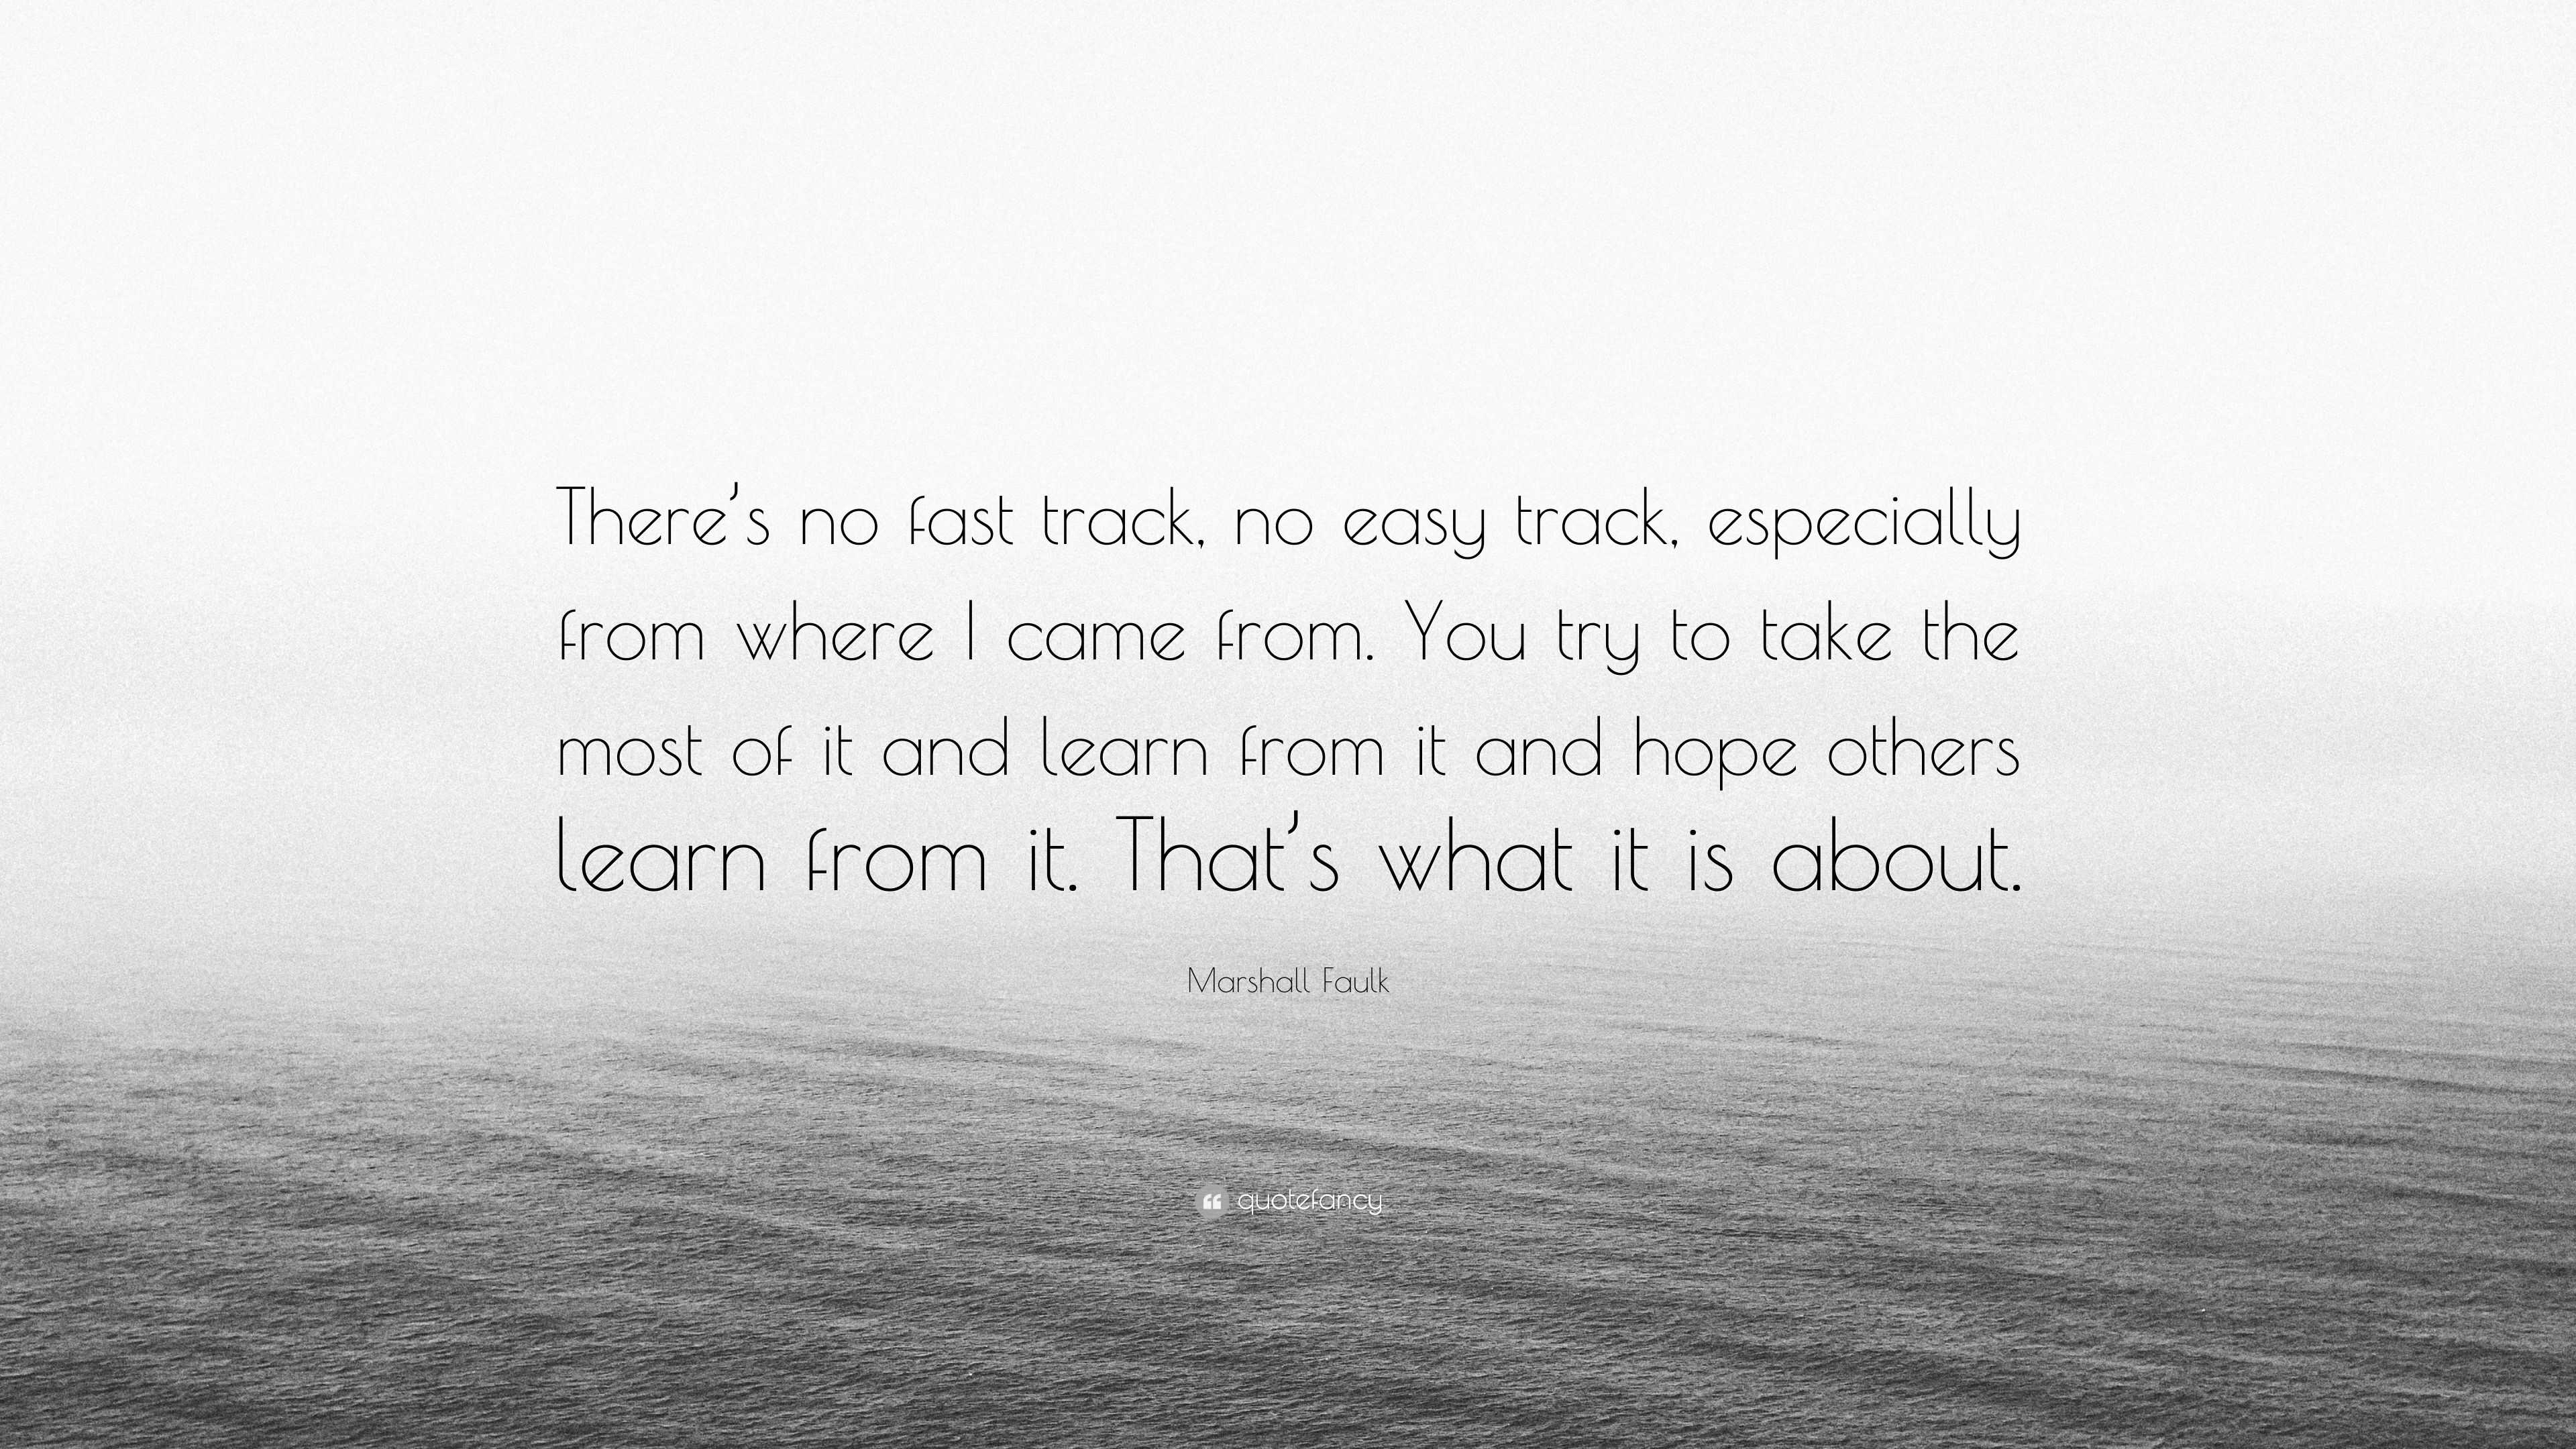 https://quotefancy.com/media/wallpaper/3840x2160/4029864-Marshall-Faulk-Quote-There-s-no-fast-track-no-easy-track.jpg